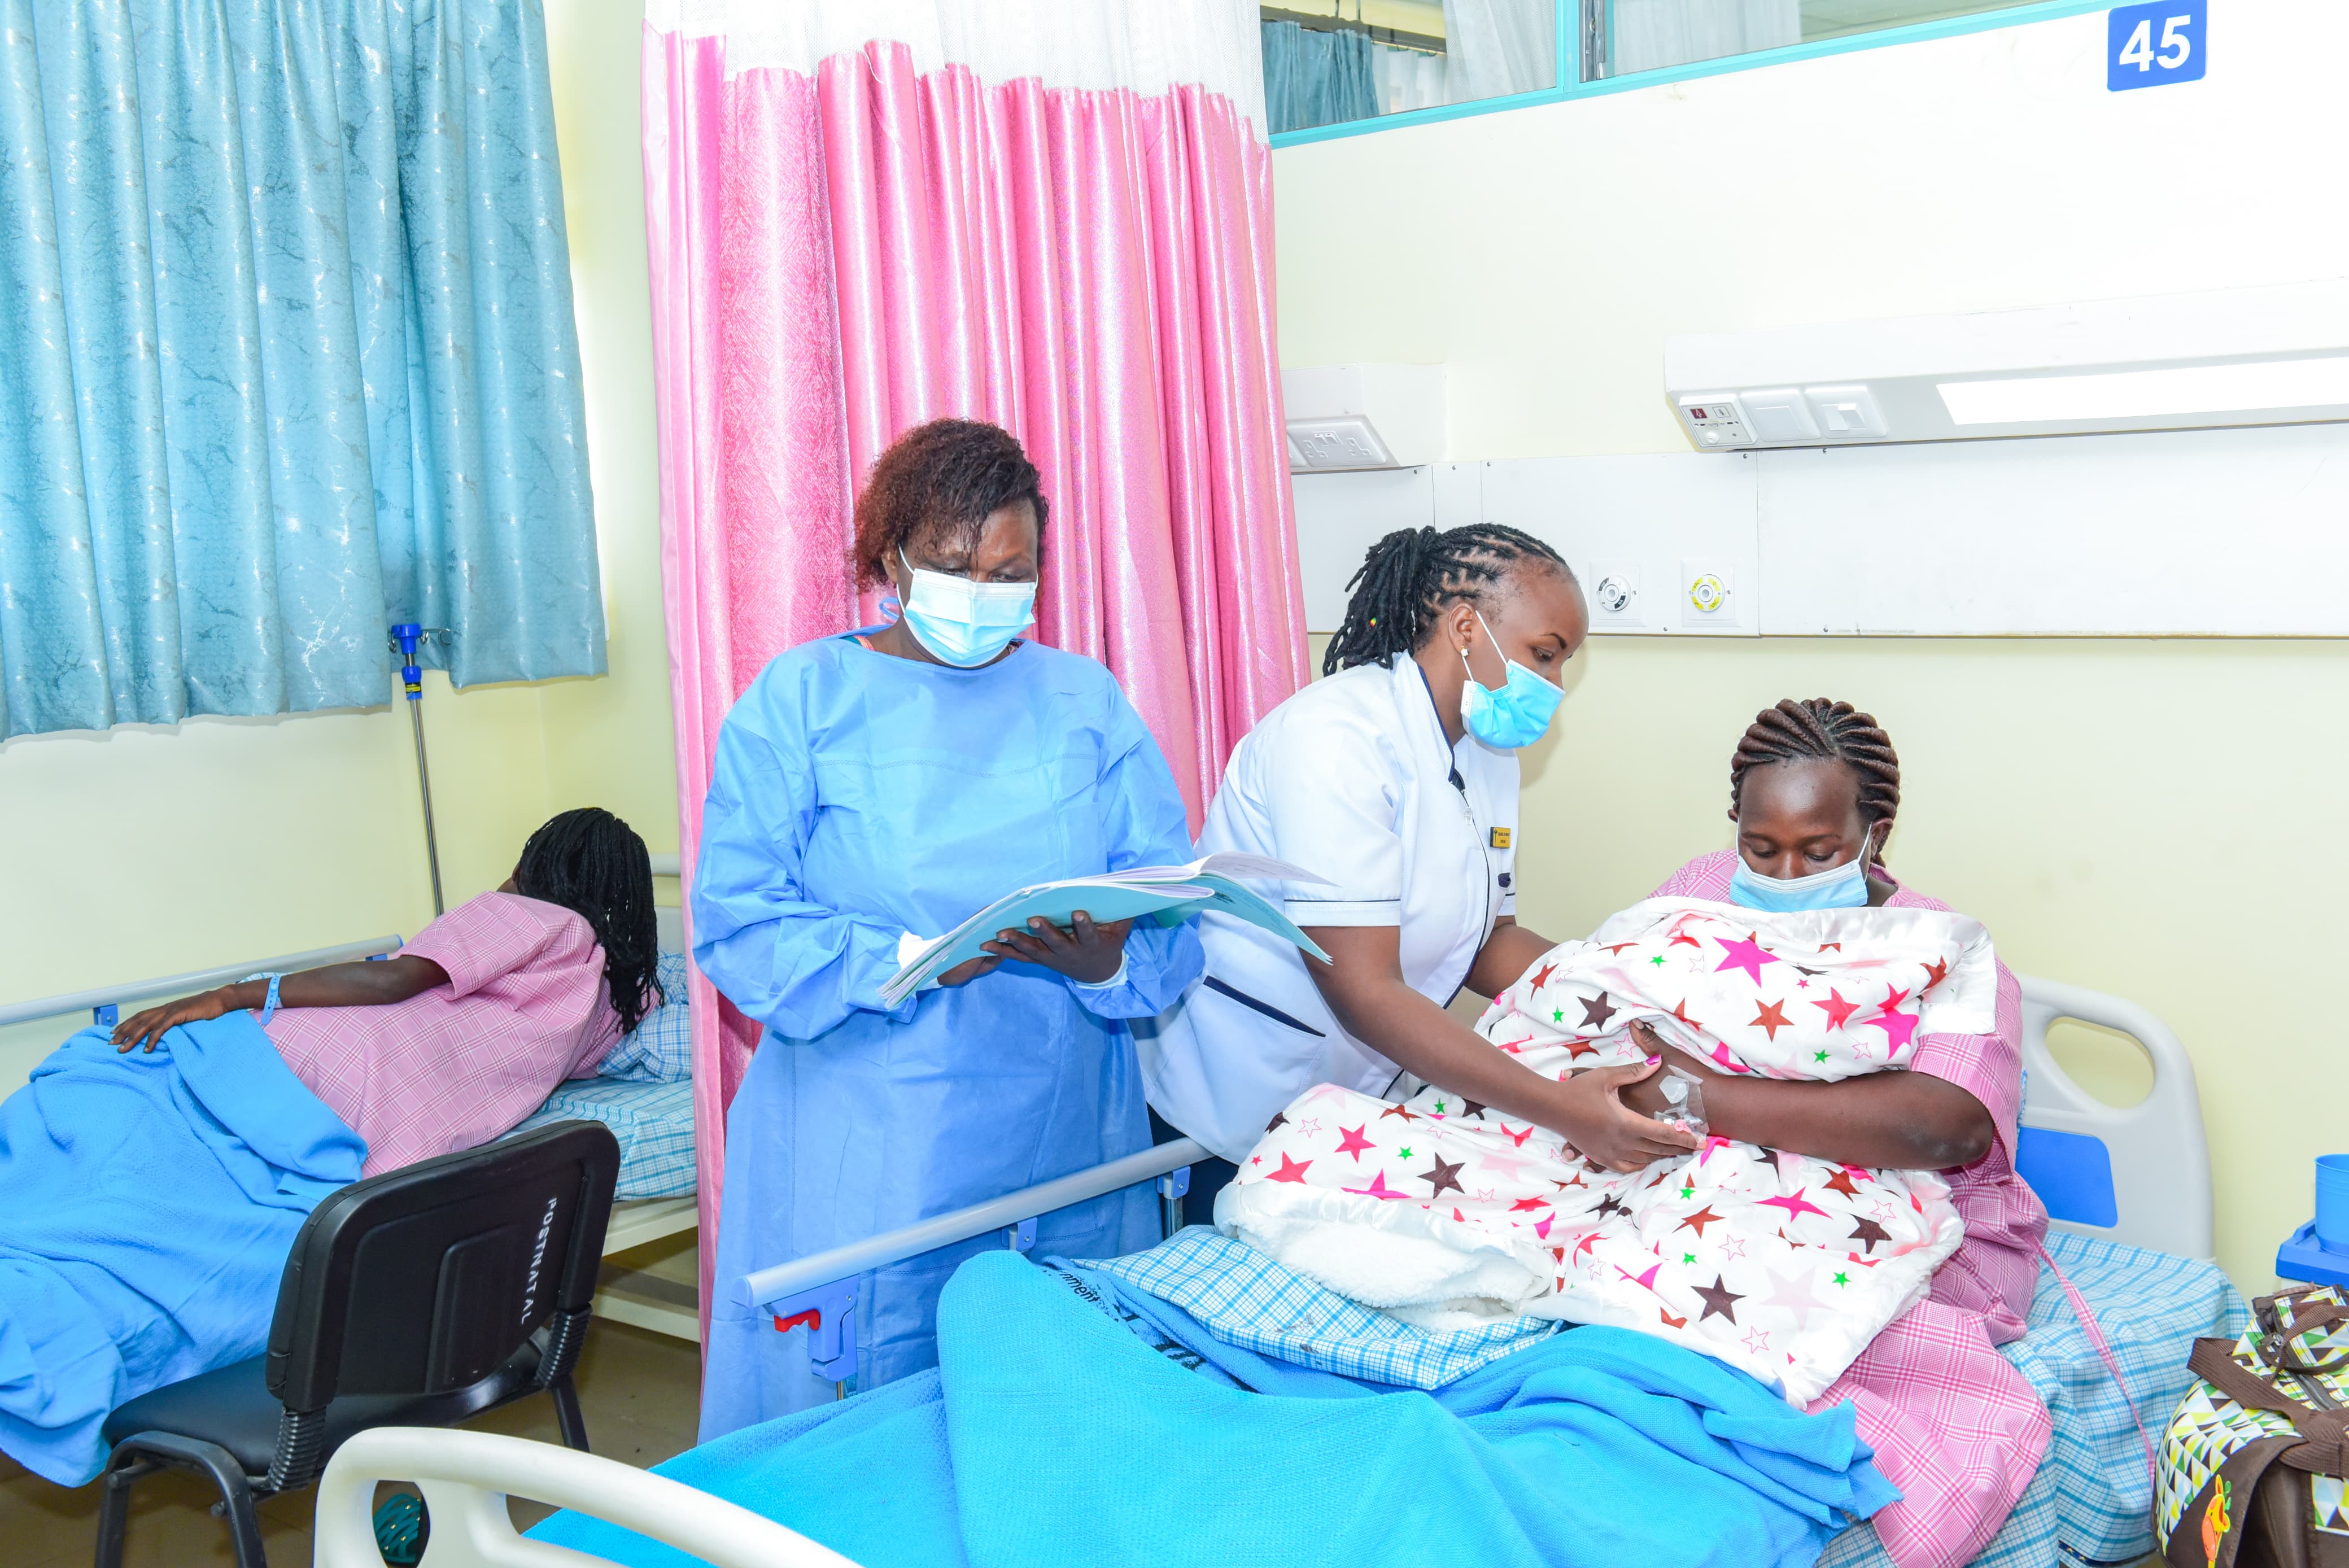 Infant Mortality in Kirinyaga County Goes Down From 22% in 2013 to About 8%